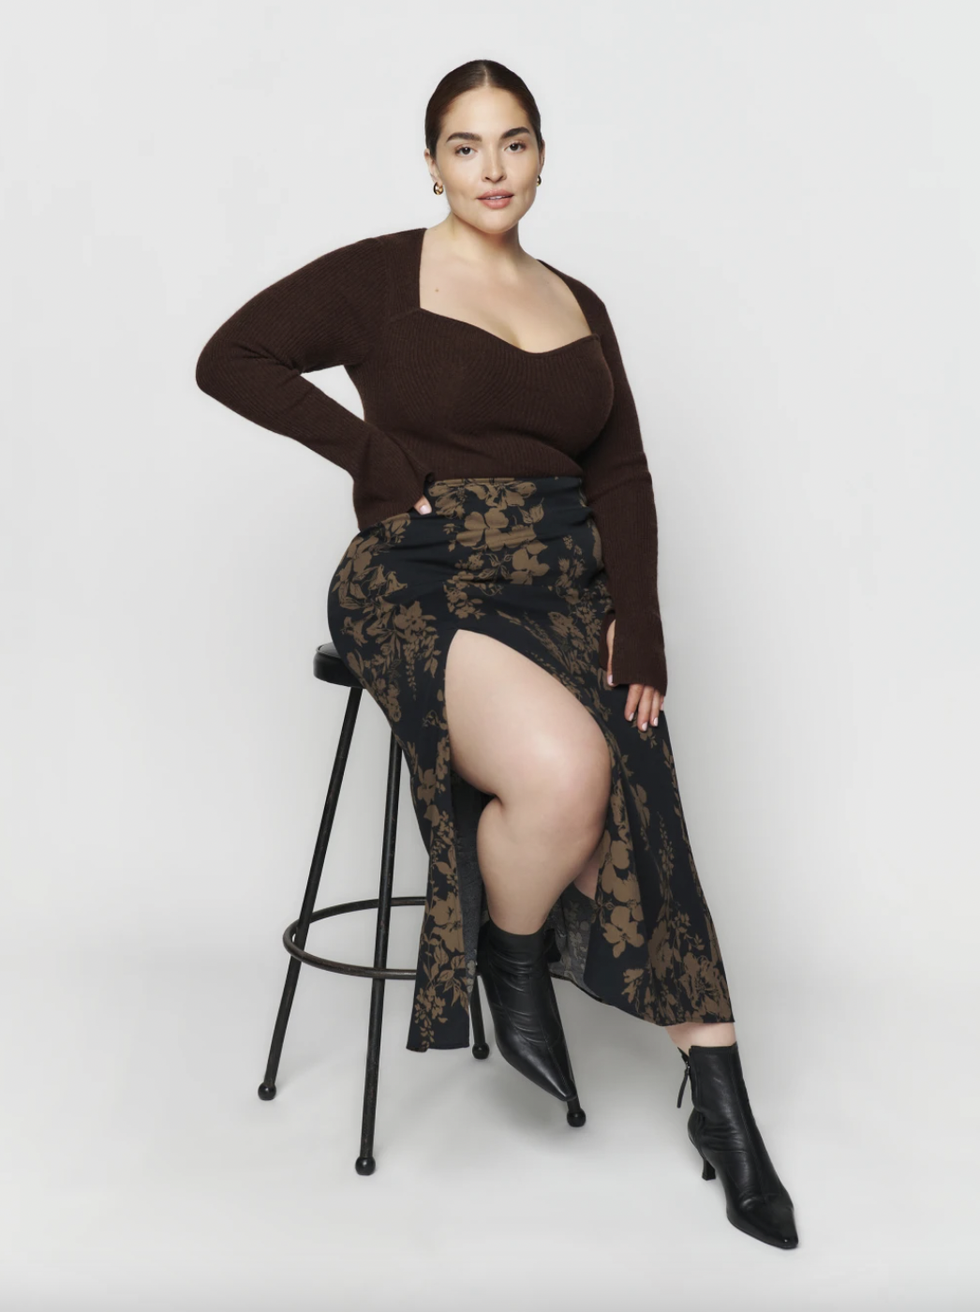 Plus Size Winter Outfits-14 Chic Winter style for Curvy Women  Plus size winter  outfits, Chic winter style, Fashion trends curvy